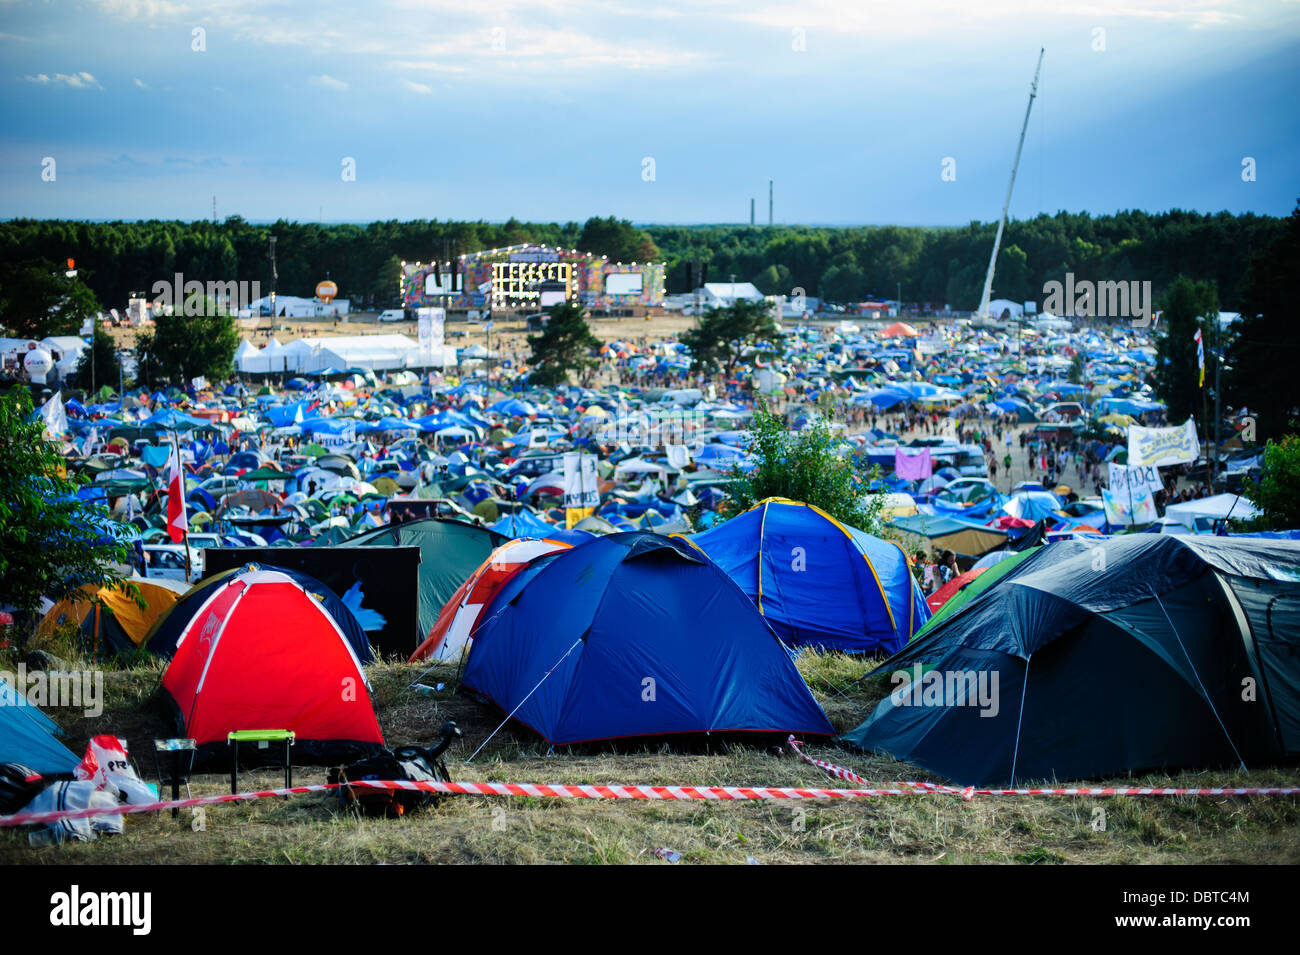 View of the crowded campsite in front of the main stage during the Przystanek Woodstock, Kostrzyn, Poland. Stock Photo